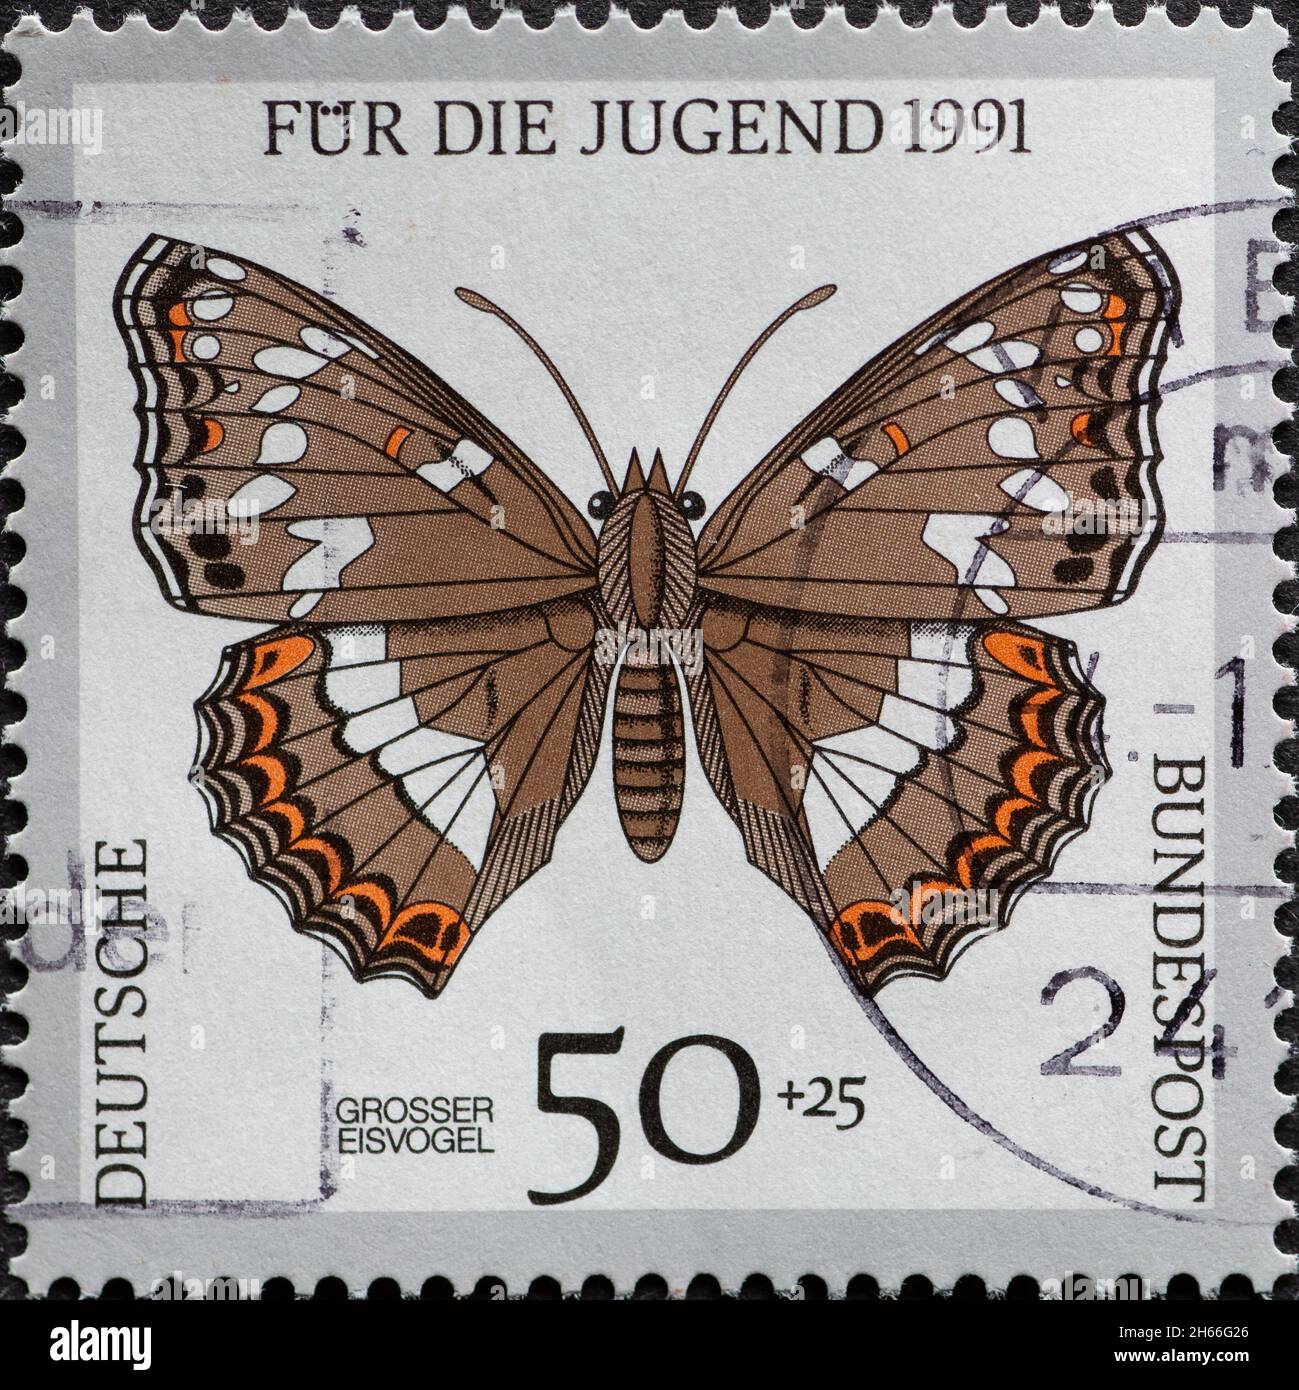 GERMANY - CIRCA 1991: a postage stamp from Germany, showing an endangered butterfly Large Kingfisher Limenitis populi Stock Photo